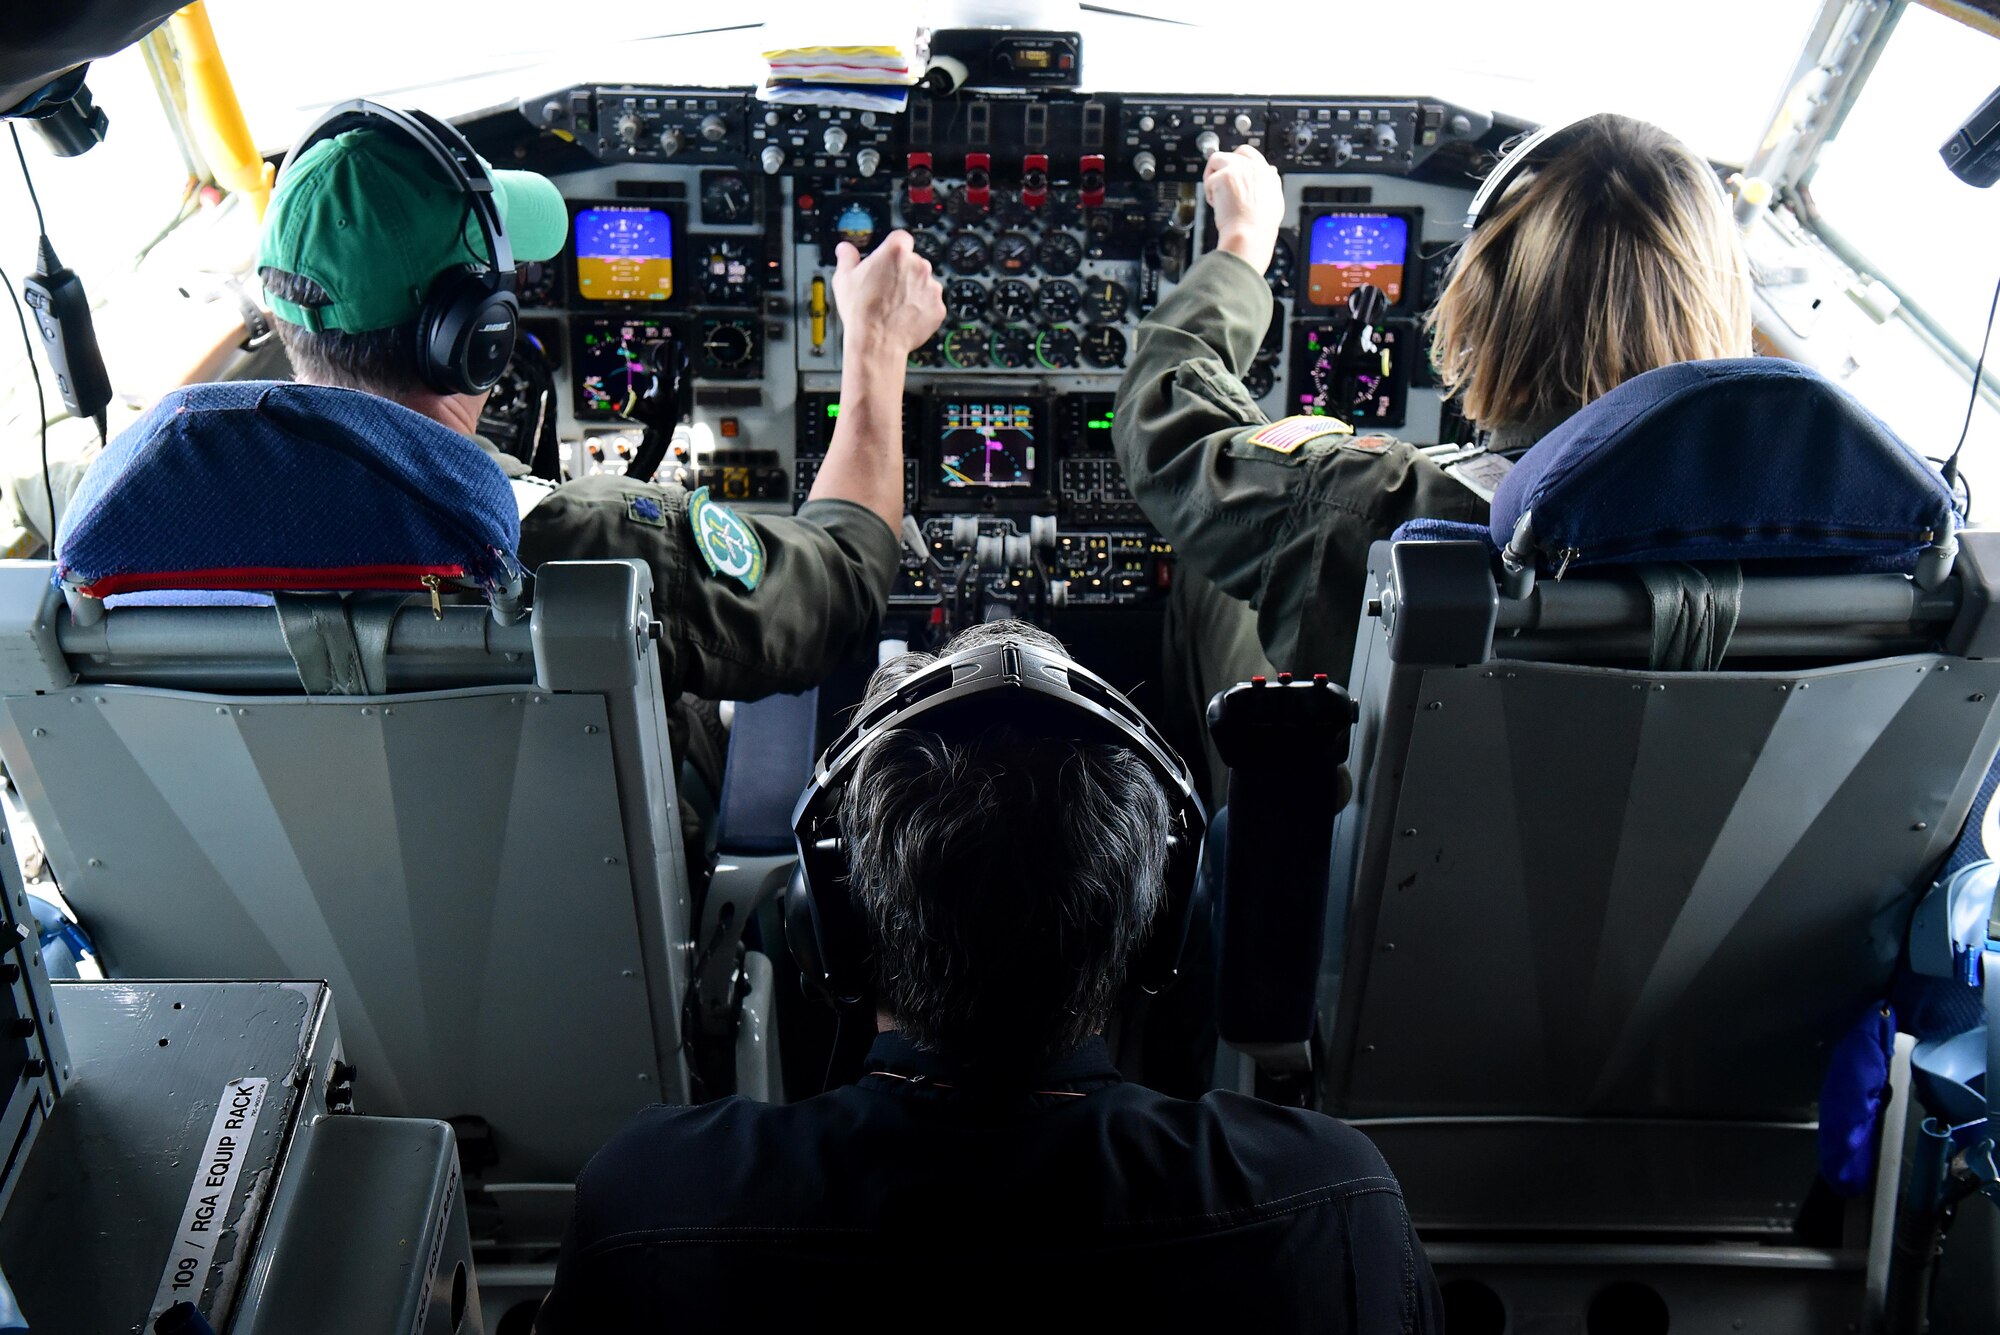 Lt. Col. Wayne Turner and Maj. Amanda Person, 77th Air Refueling Squadron, KC-135R Stratotanker pilots, fly civic leaders including Lt. Governor of North Carolina, Dan Forest, May 18, 2017, in the skies over Seymour Johnson Air Force Base, North Carolina. The flight occurred two days prior to the opening ceremony of Wings Over Wayne Air Show, which will headline the U.S. Navy Blue Angels premiere aerial demonstration team. (U.S. Air Force photo by Airman 1st Class Kenneth Boyton)